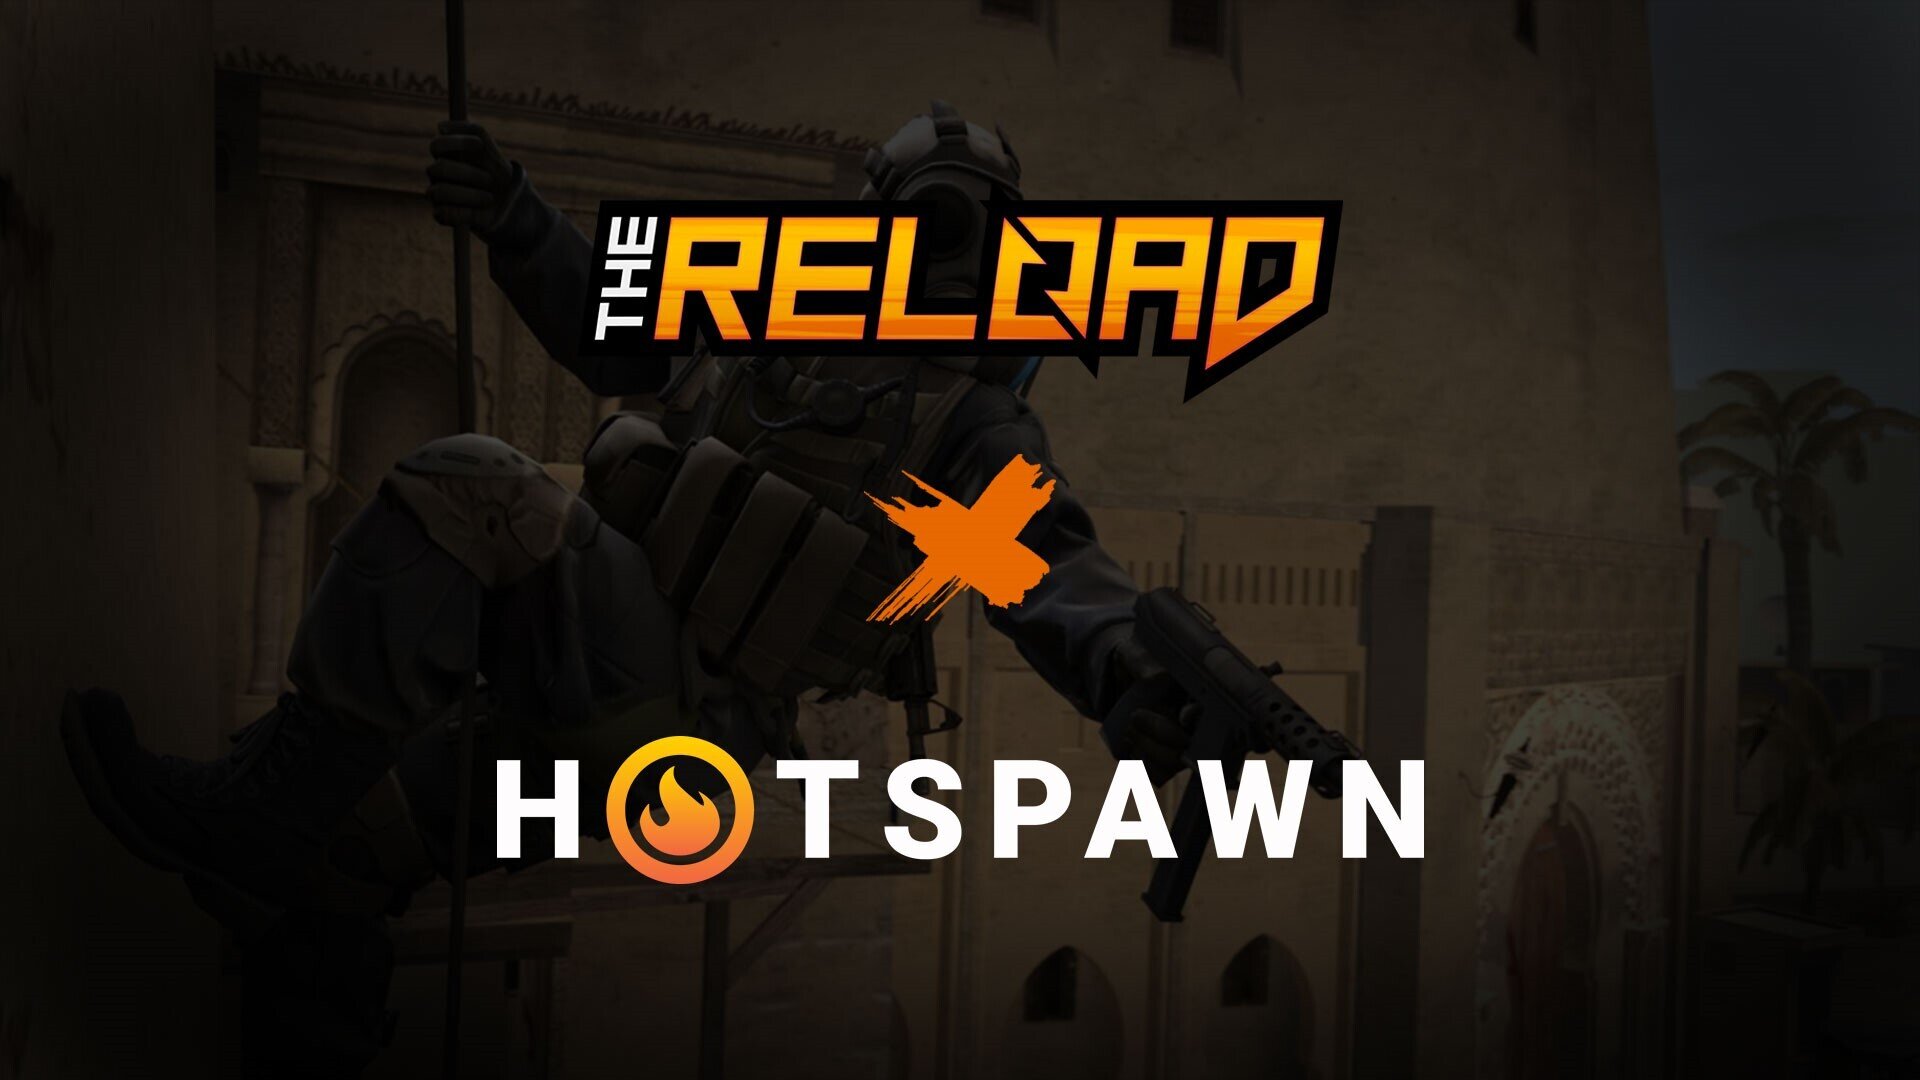 Hotspawn partners with the Reload Podcast